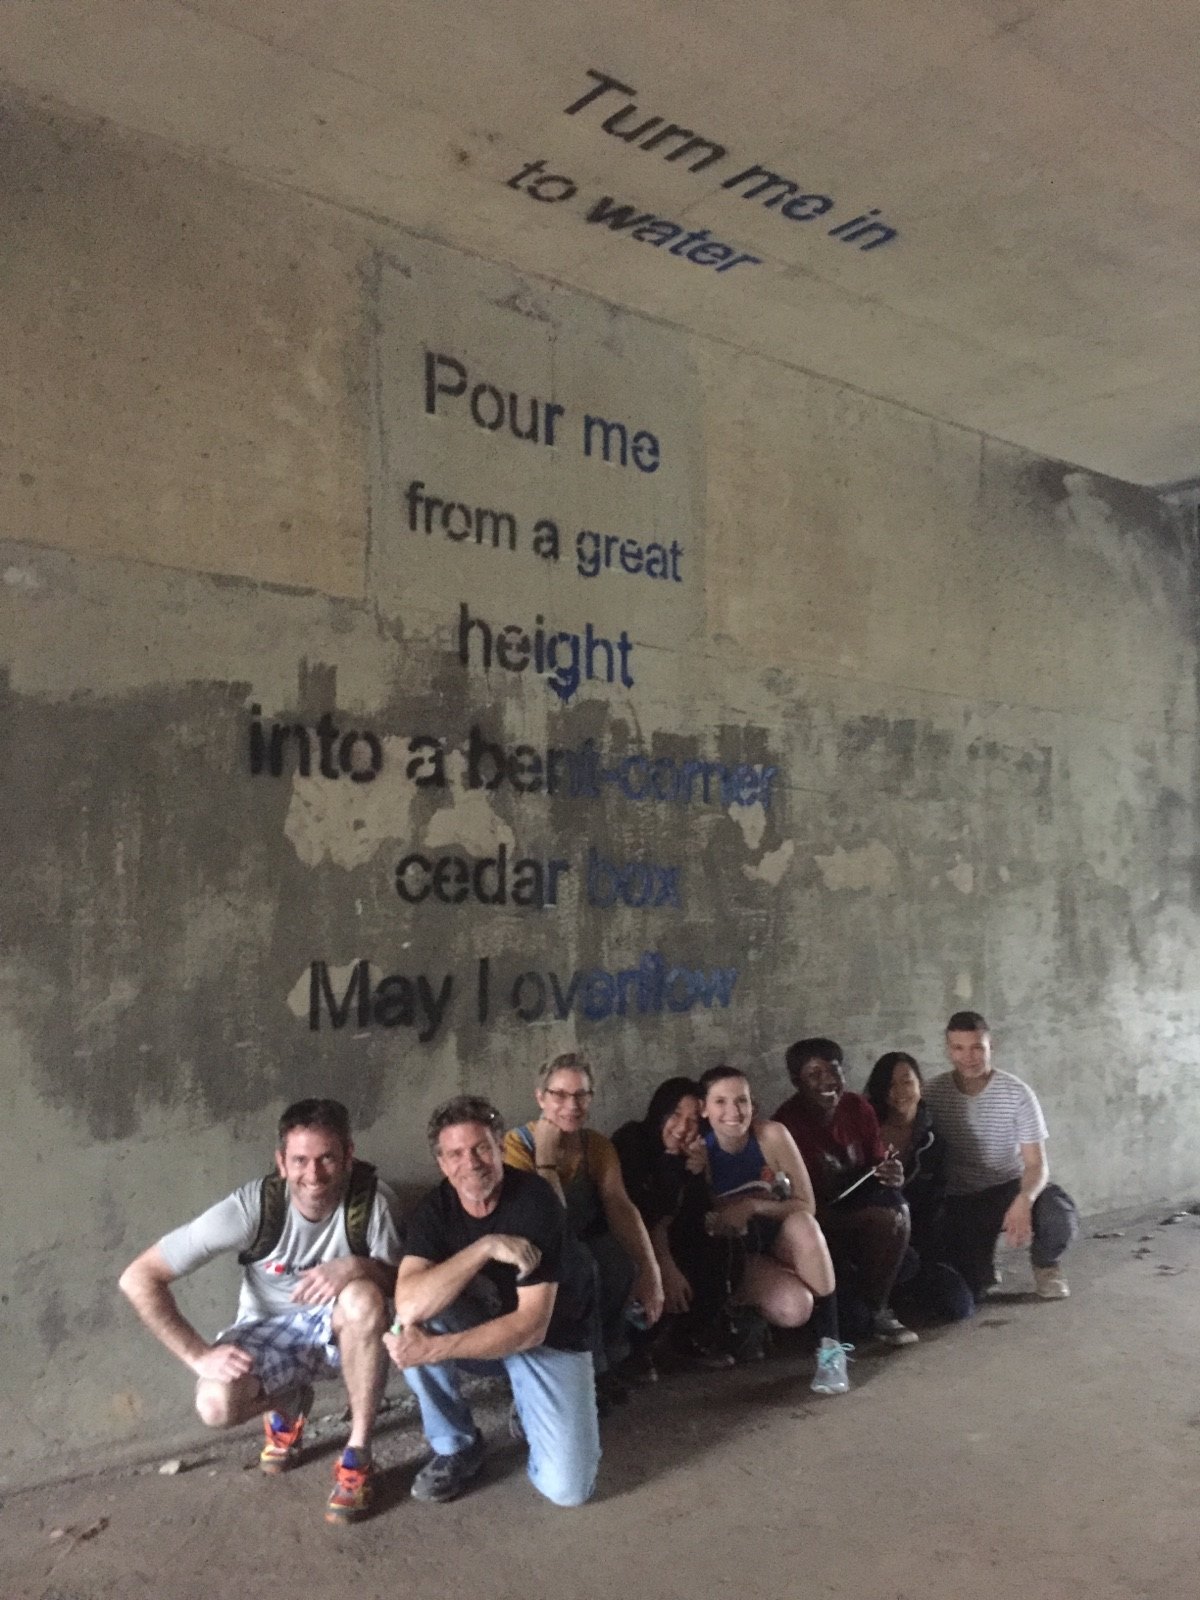 The poem Funeral on a wall at the Karl Stirner Arts Trail